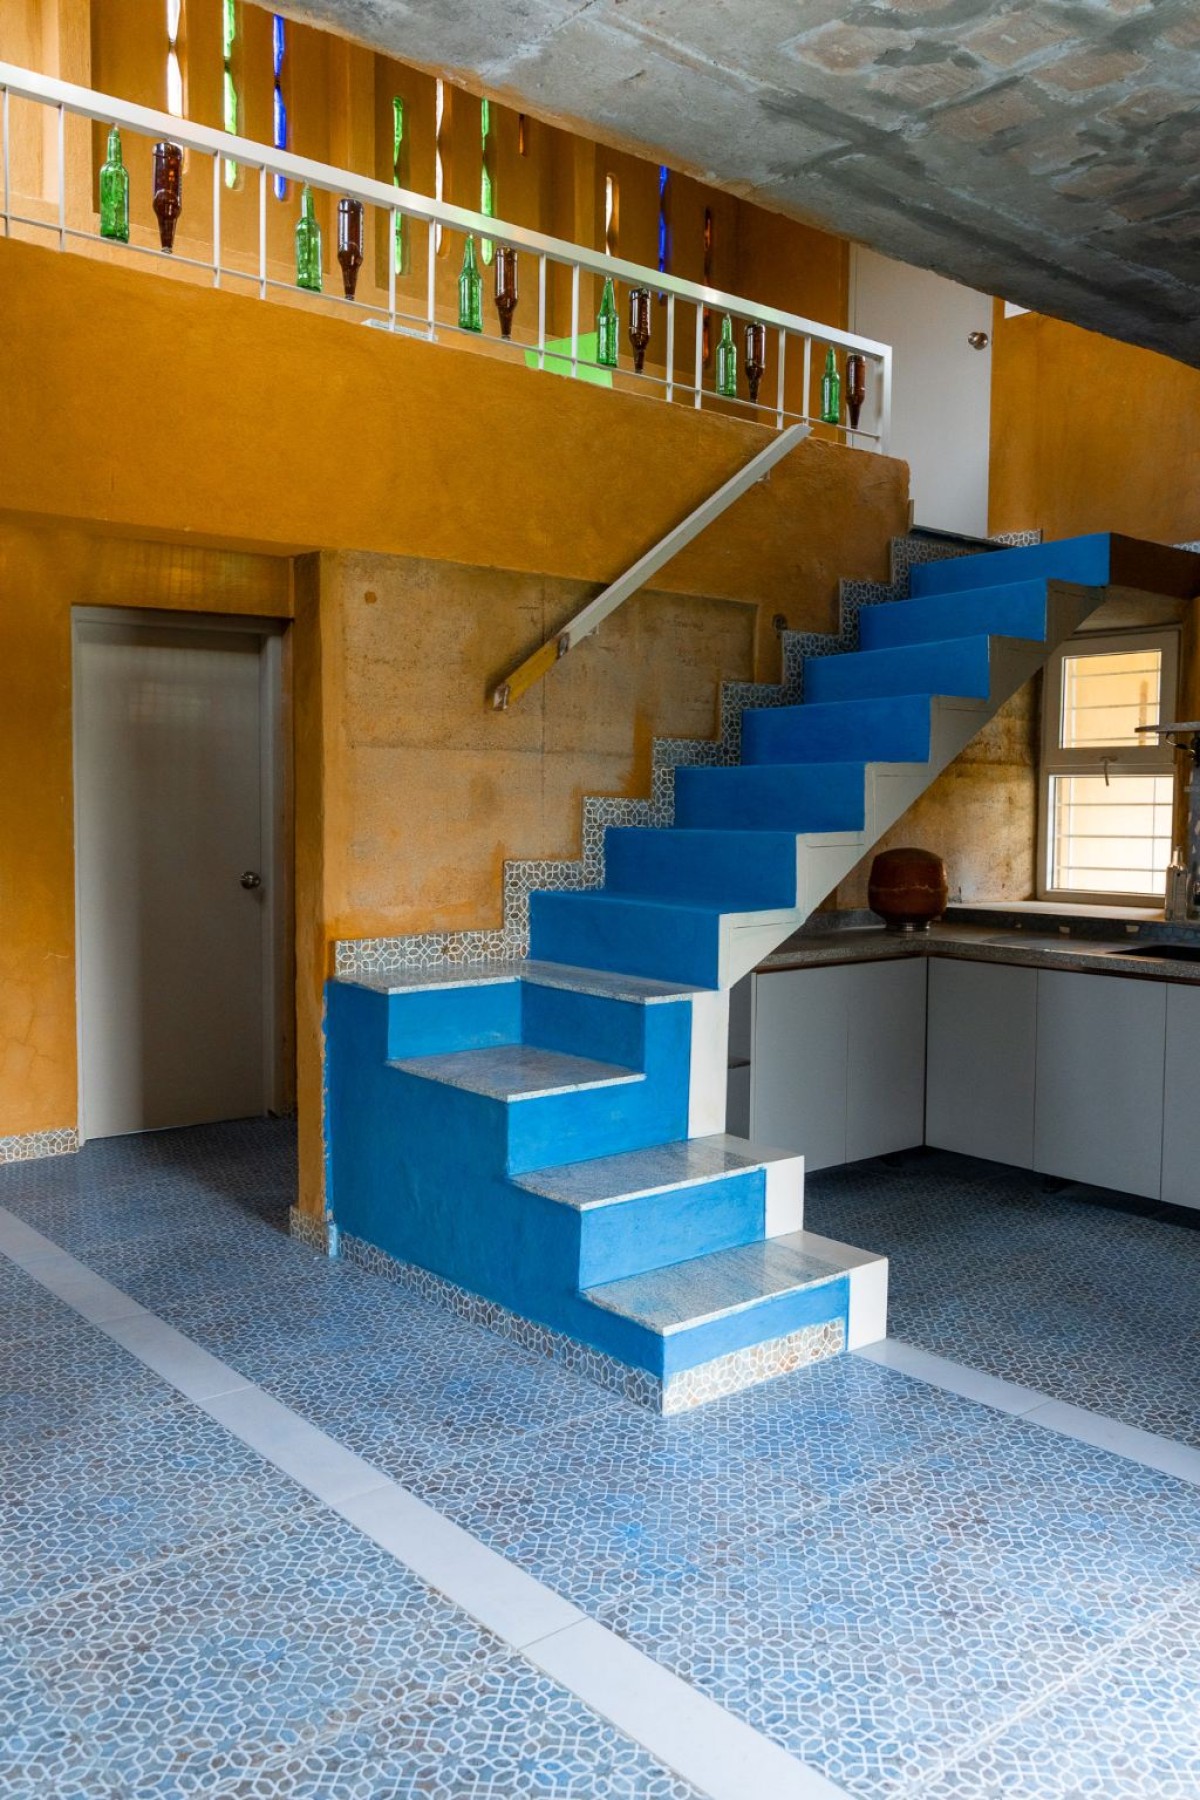 Staircase of Composite Earth Farmhouse by Studio Verge